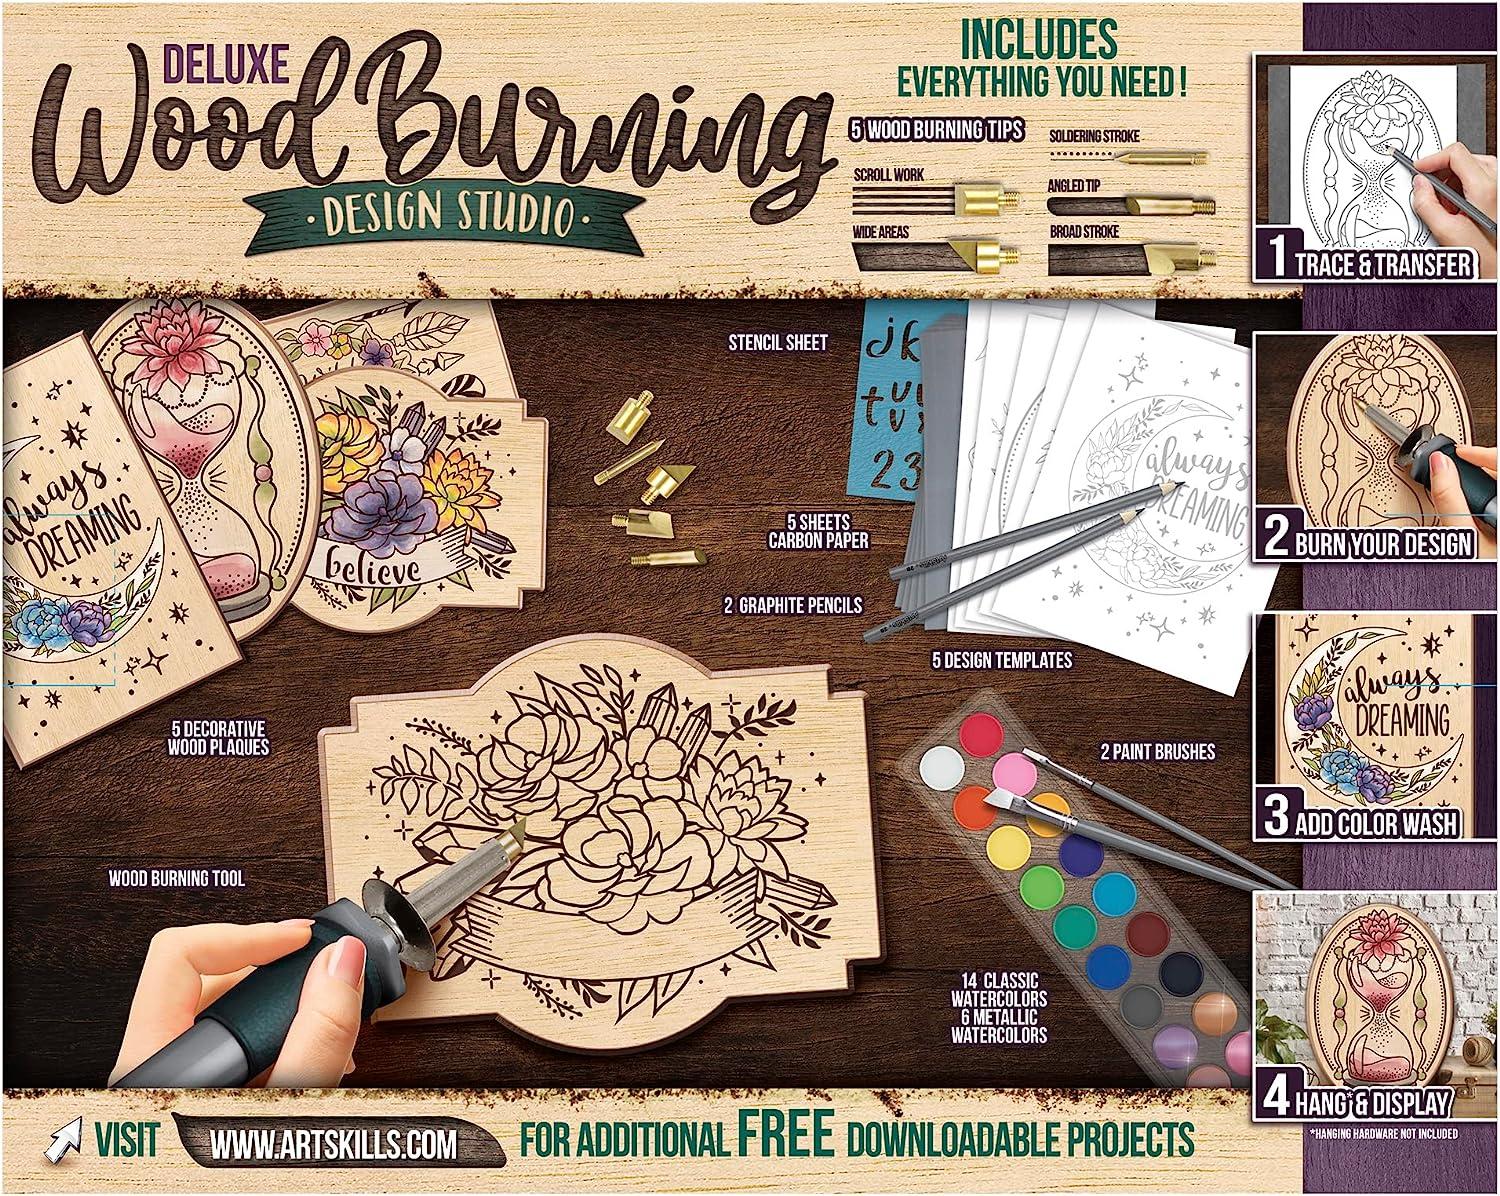 ArtSkills Wood Burning Kit for Beginners - Deluxe Pyrography Wood Engraving  Art Kit with Burner Pen, Stencils, Watercolor Paints - 48 Piece DIY Woodburning  Tool Kit for Adults and Kids